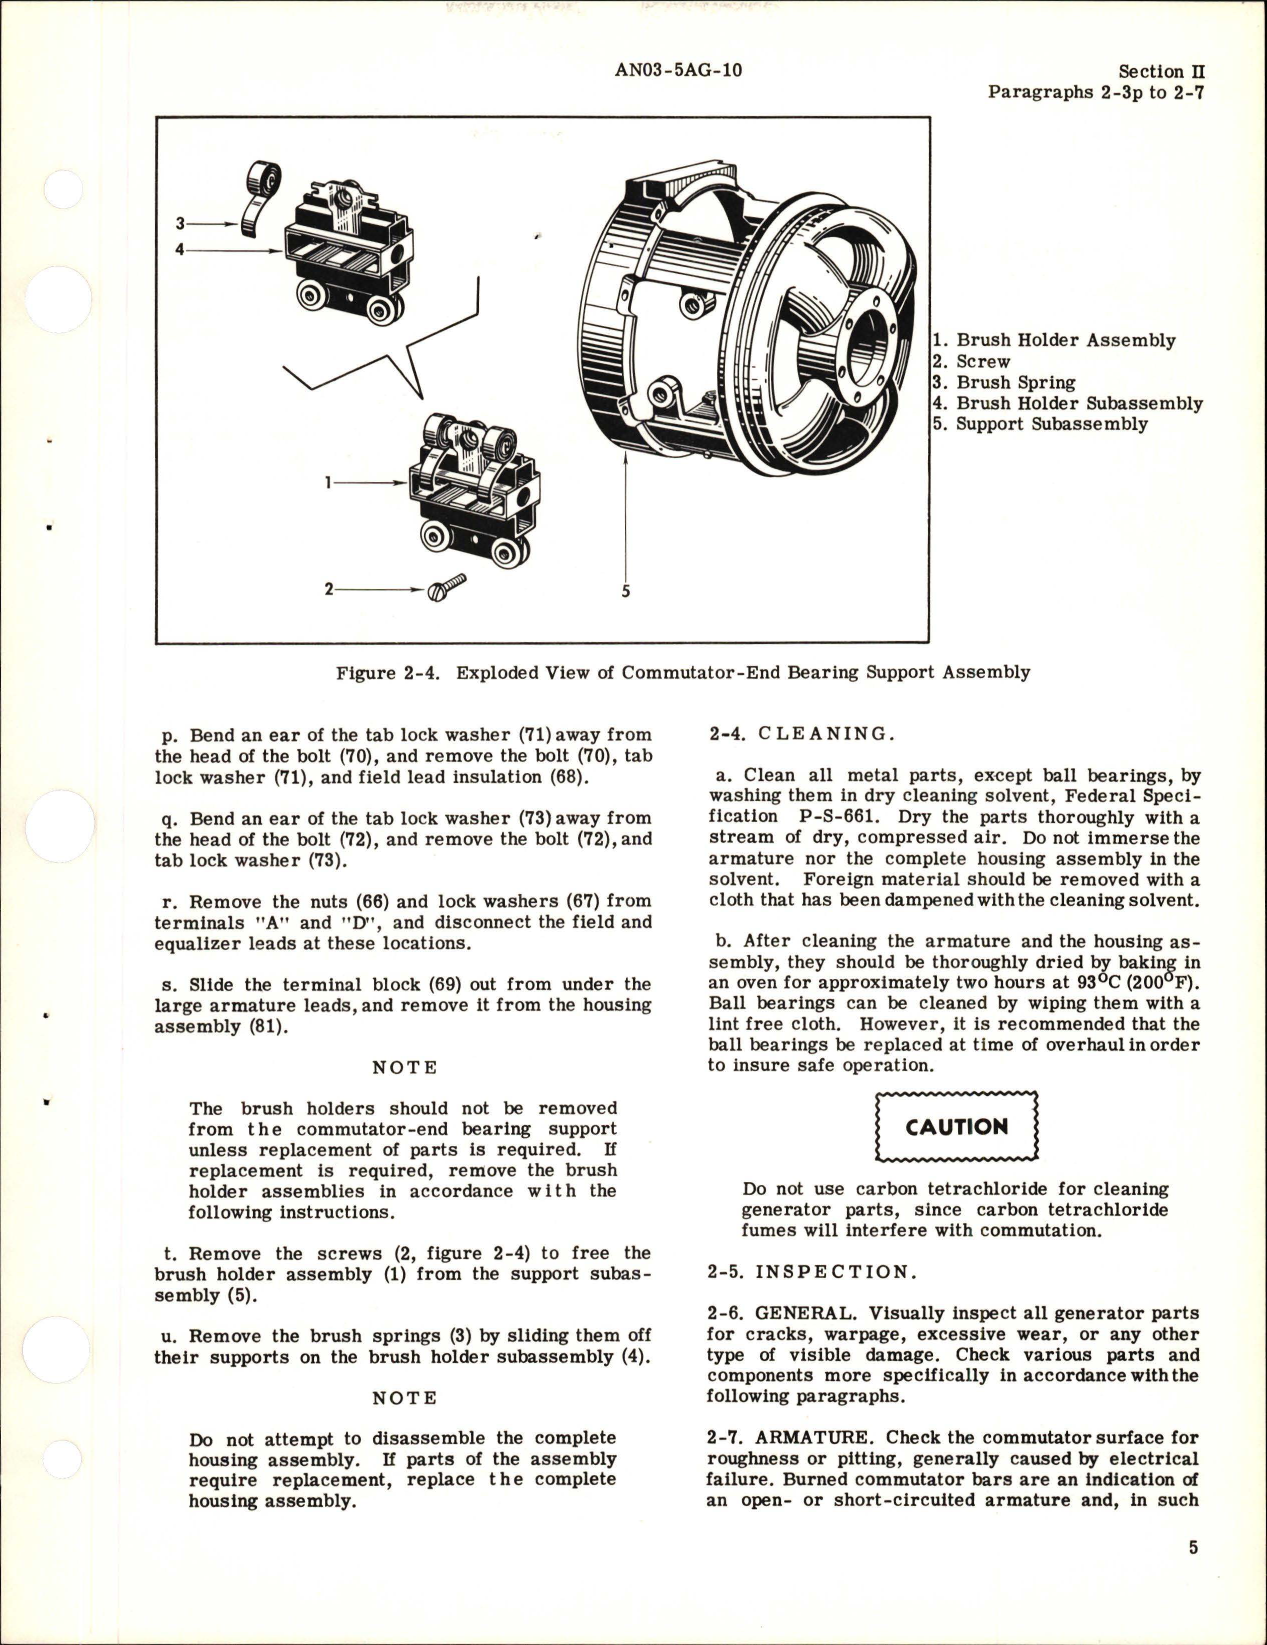 Sample page 9 from AirCorps Library document: Overhaul Instructions for Generator - Models G300, G300-3, G300-3C, G300-4A, G300-4B, G300-6BT, and G300-600A